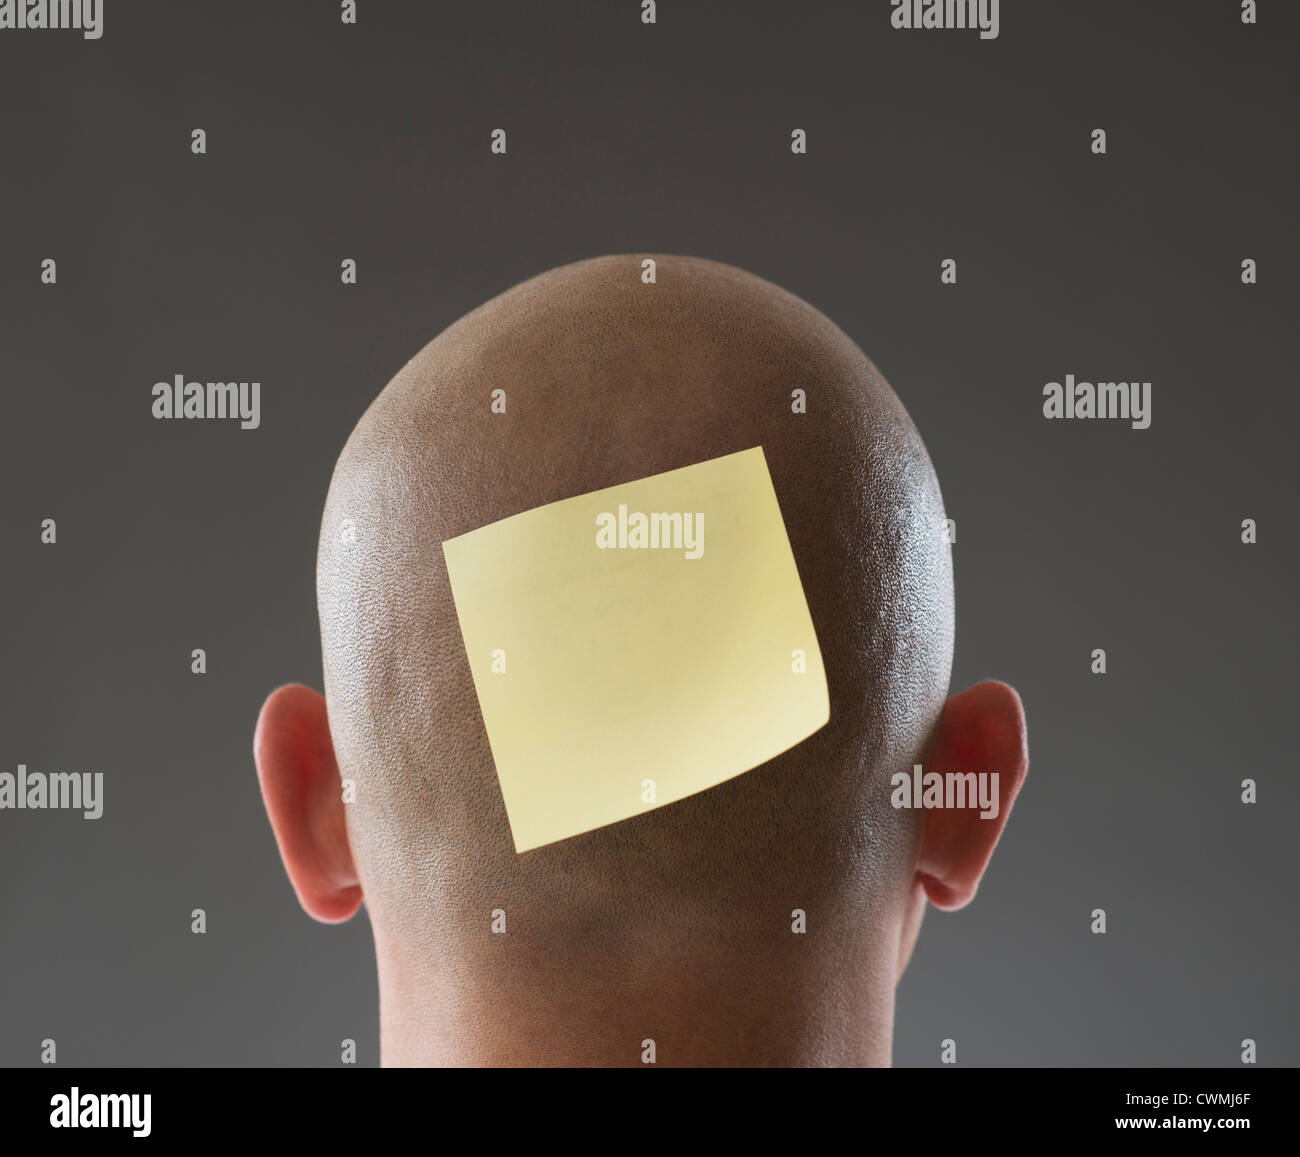 Back view of man with adhesive note on shaved head Stock Photo